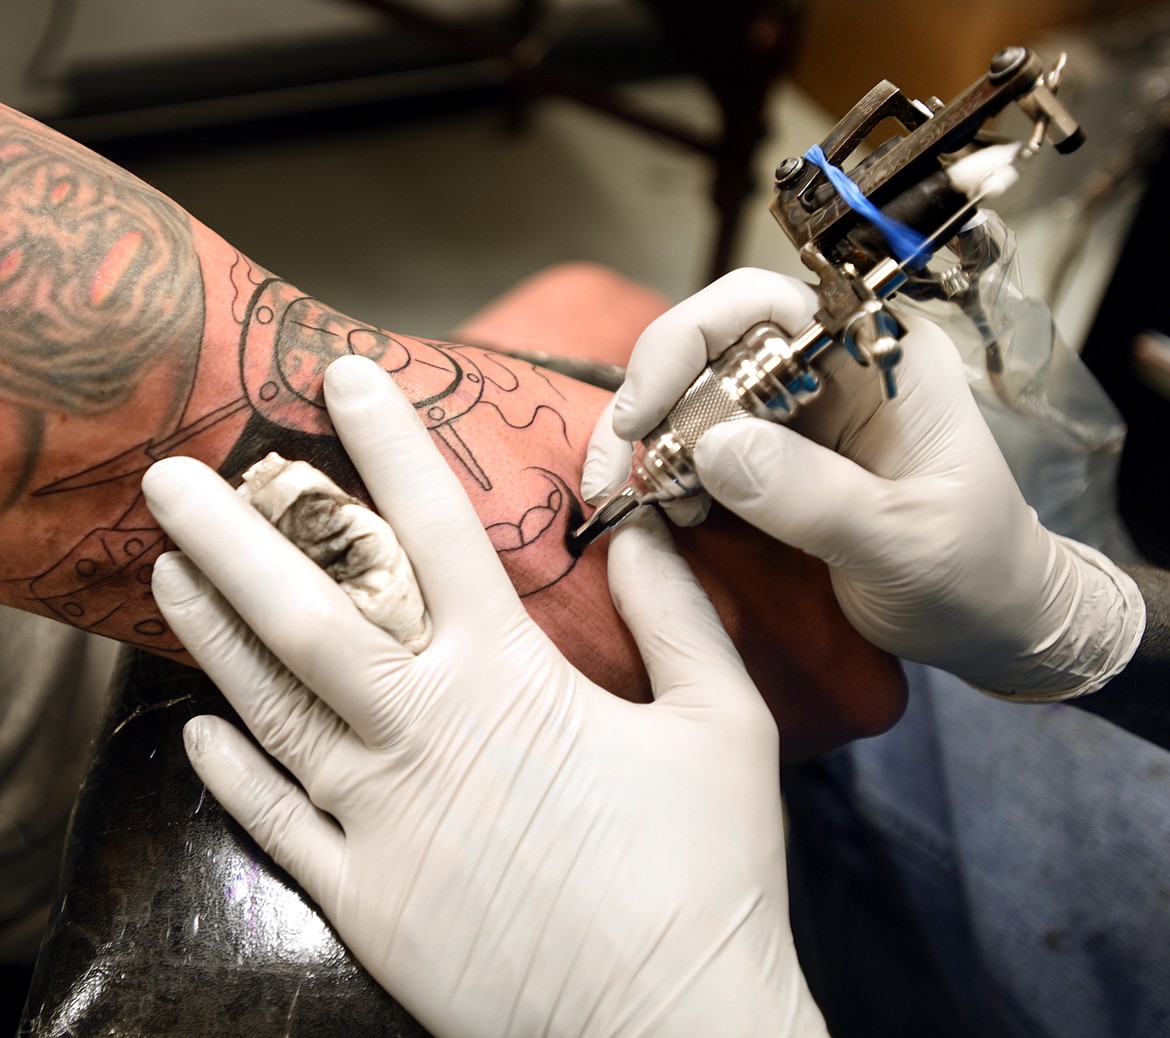 DARRYL TORGERSON working on a tattoo at Temple Decor in Kalispell.
(Brenda Ahearn/This Week in the Flathead)